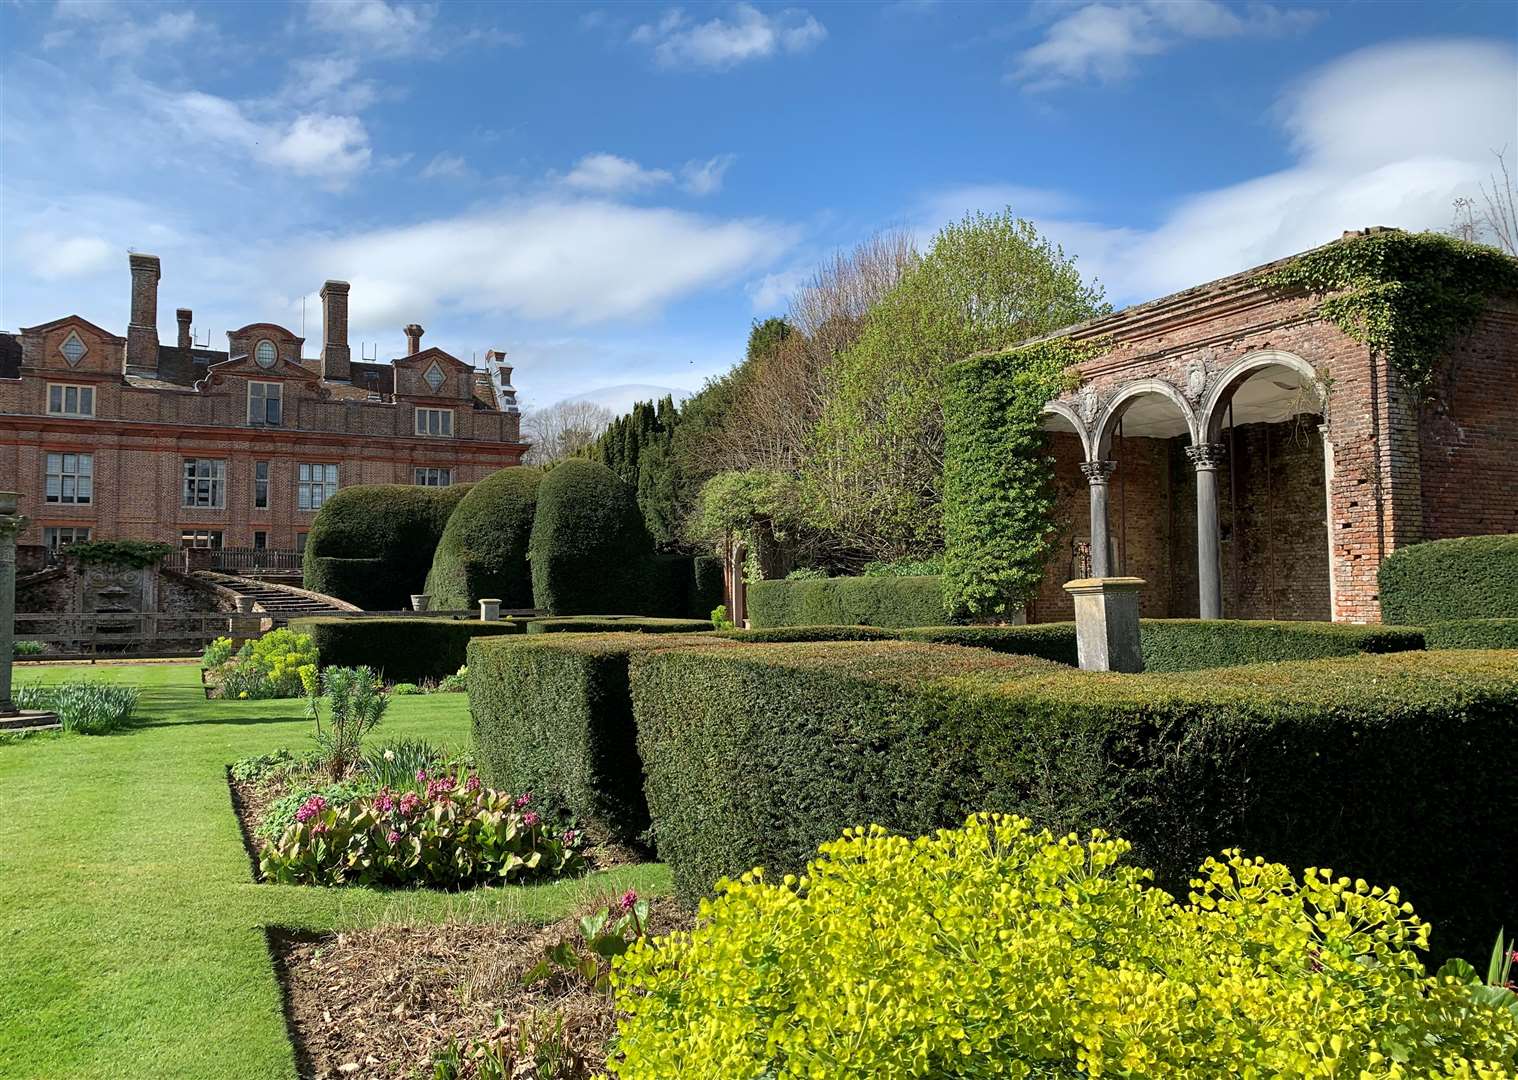 Restoration of the Italian gardens at Broome Park is expected to cost £1 million